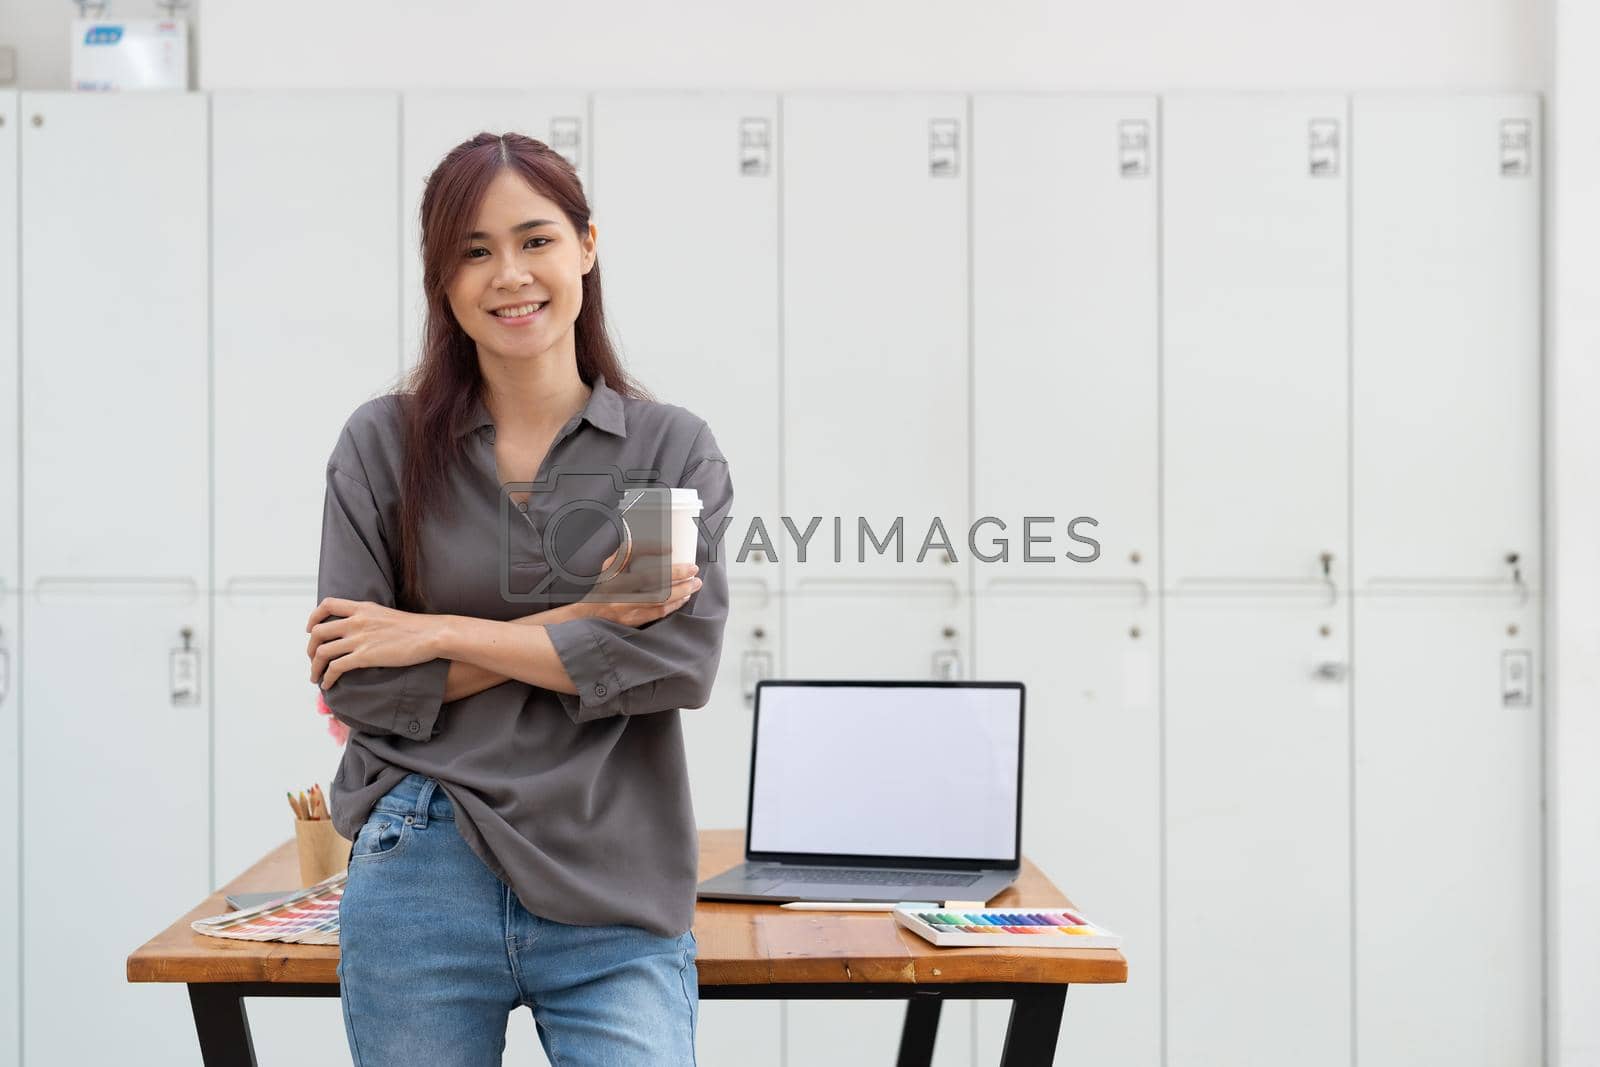 Royalty free image of Portrait of graphic designer asian woman creative on artist workplace. by nateemee